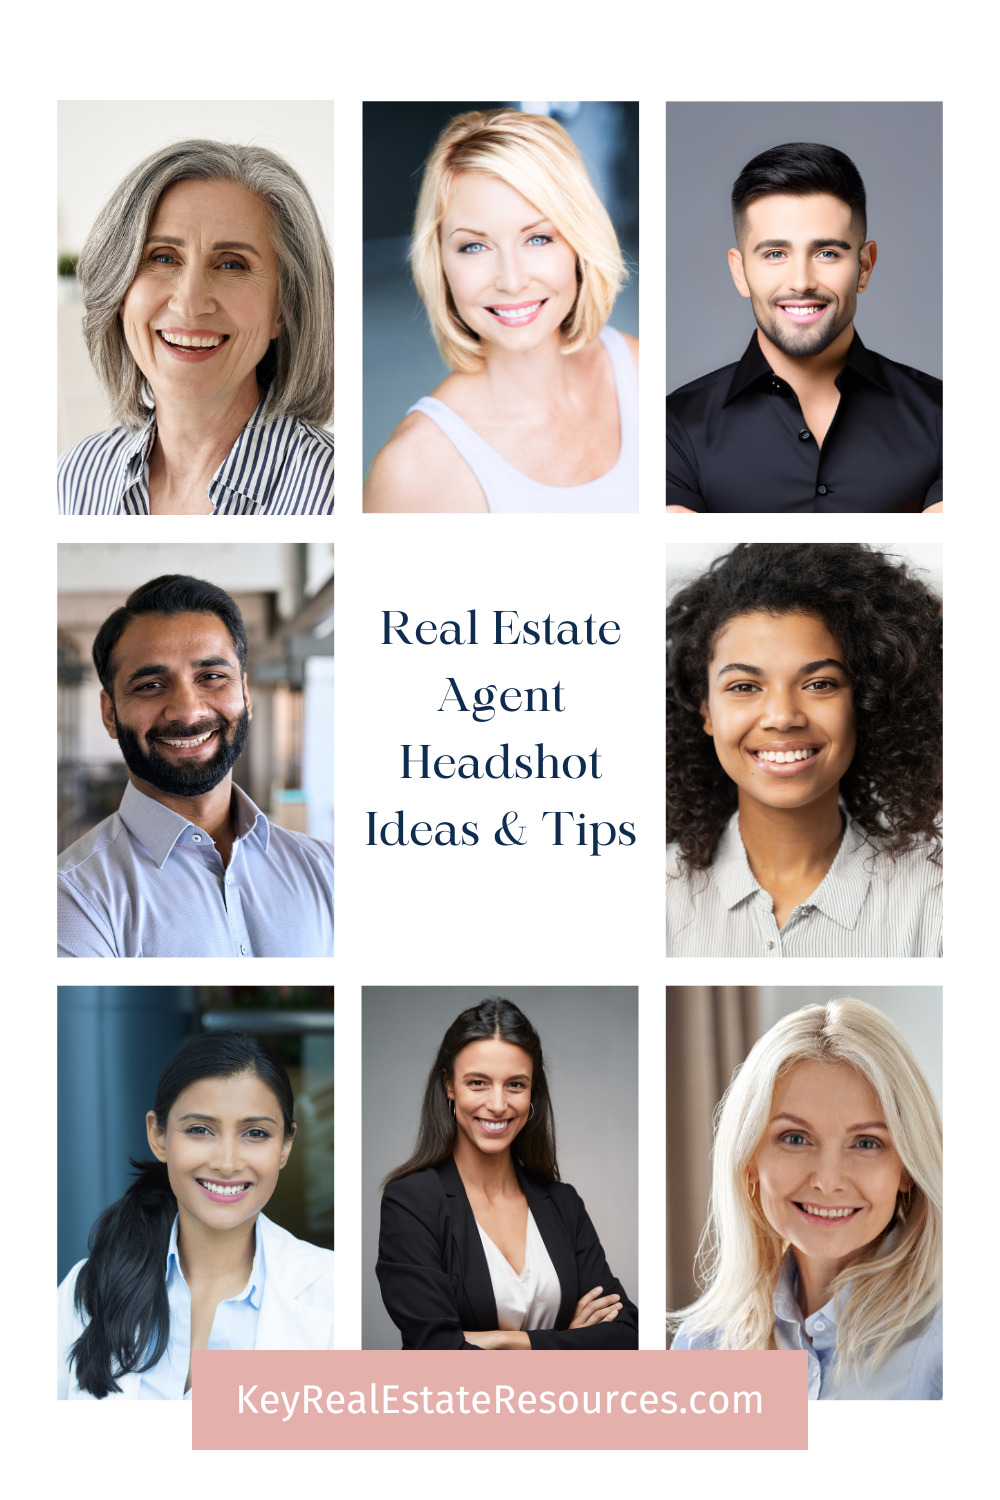 Tips and ideas for real estate agent headshots